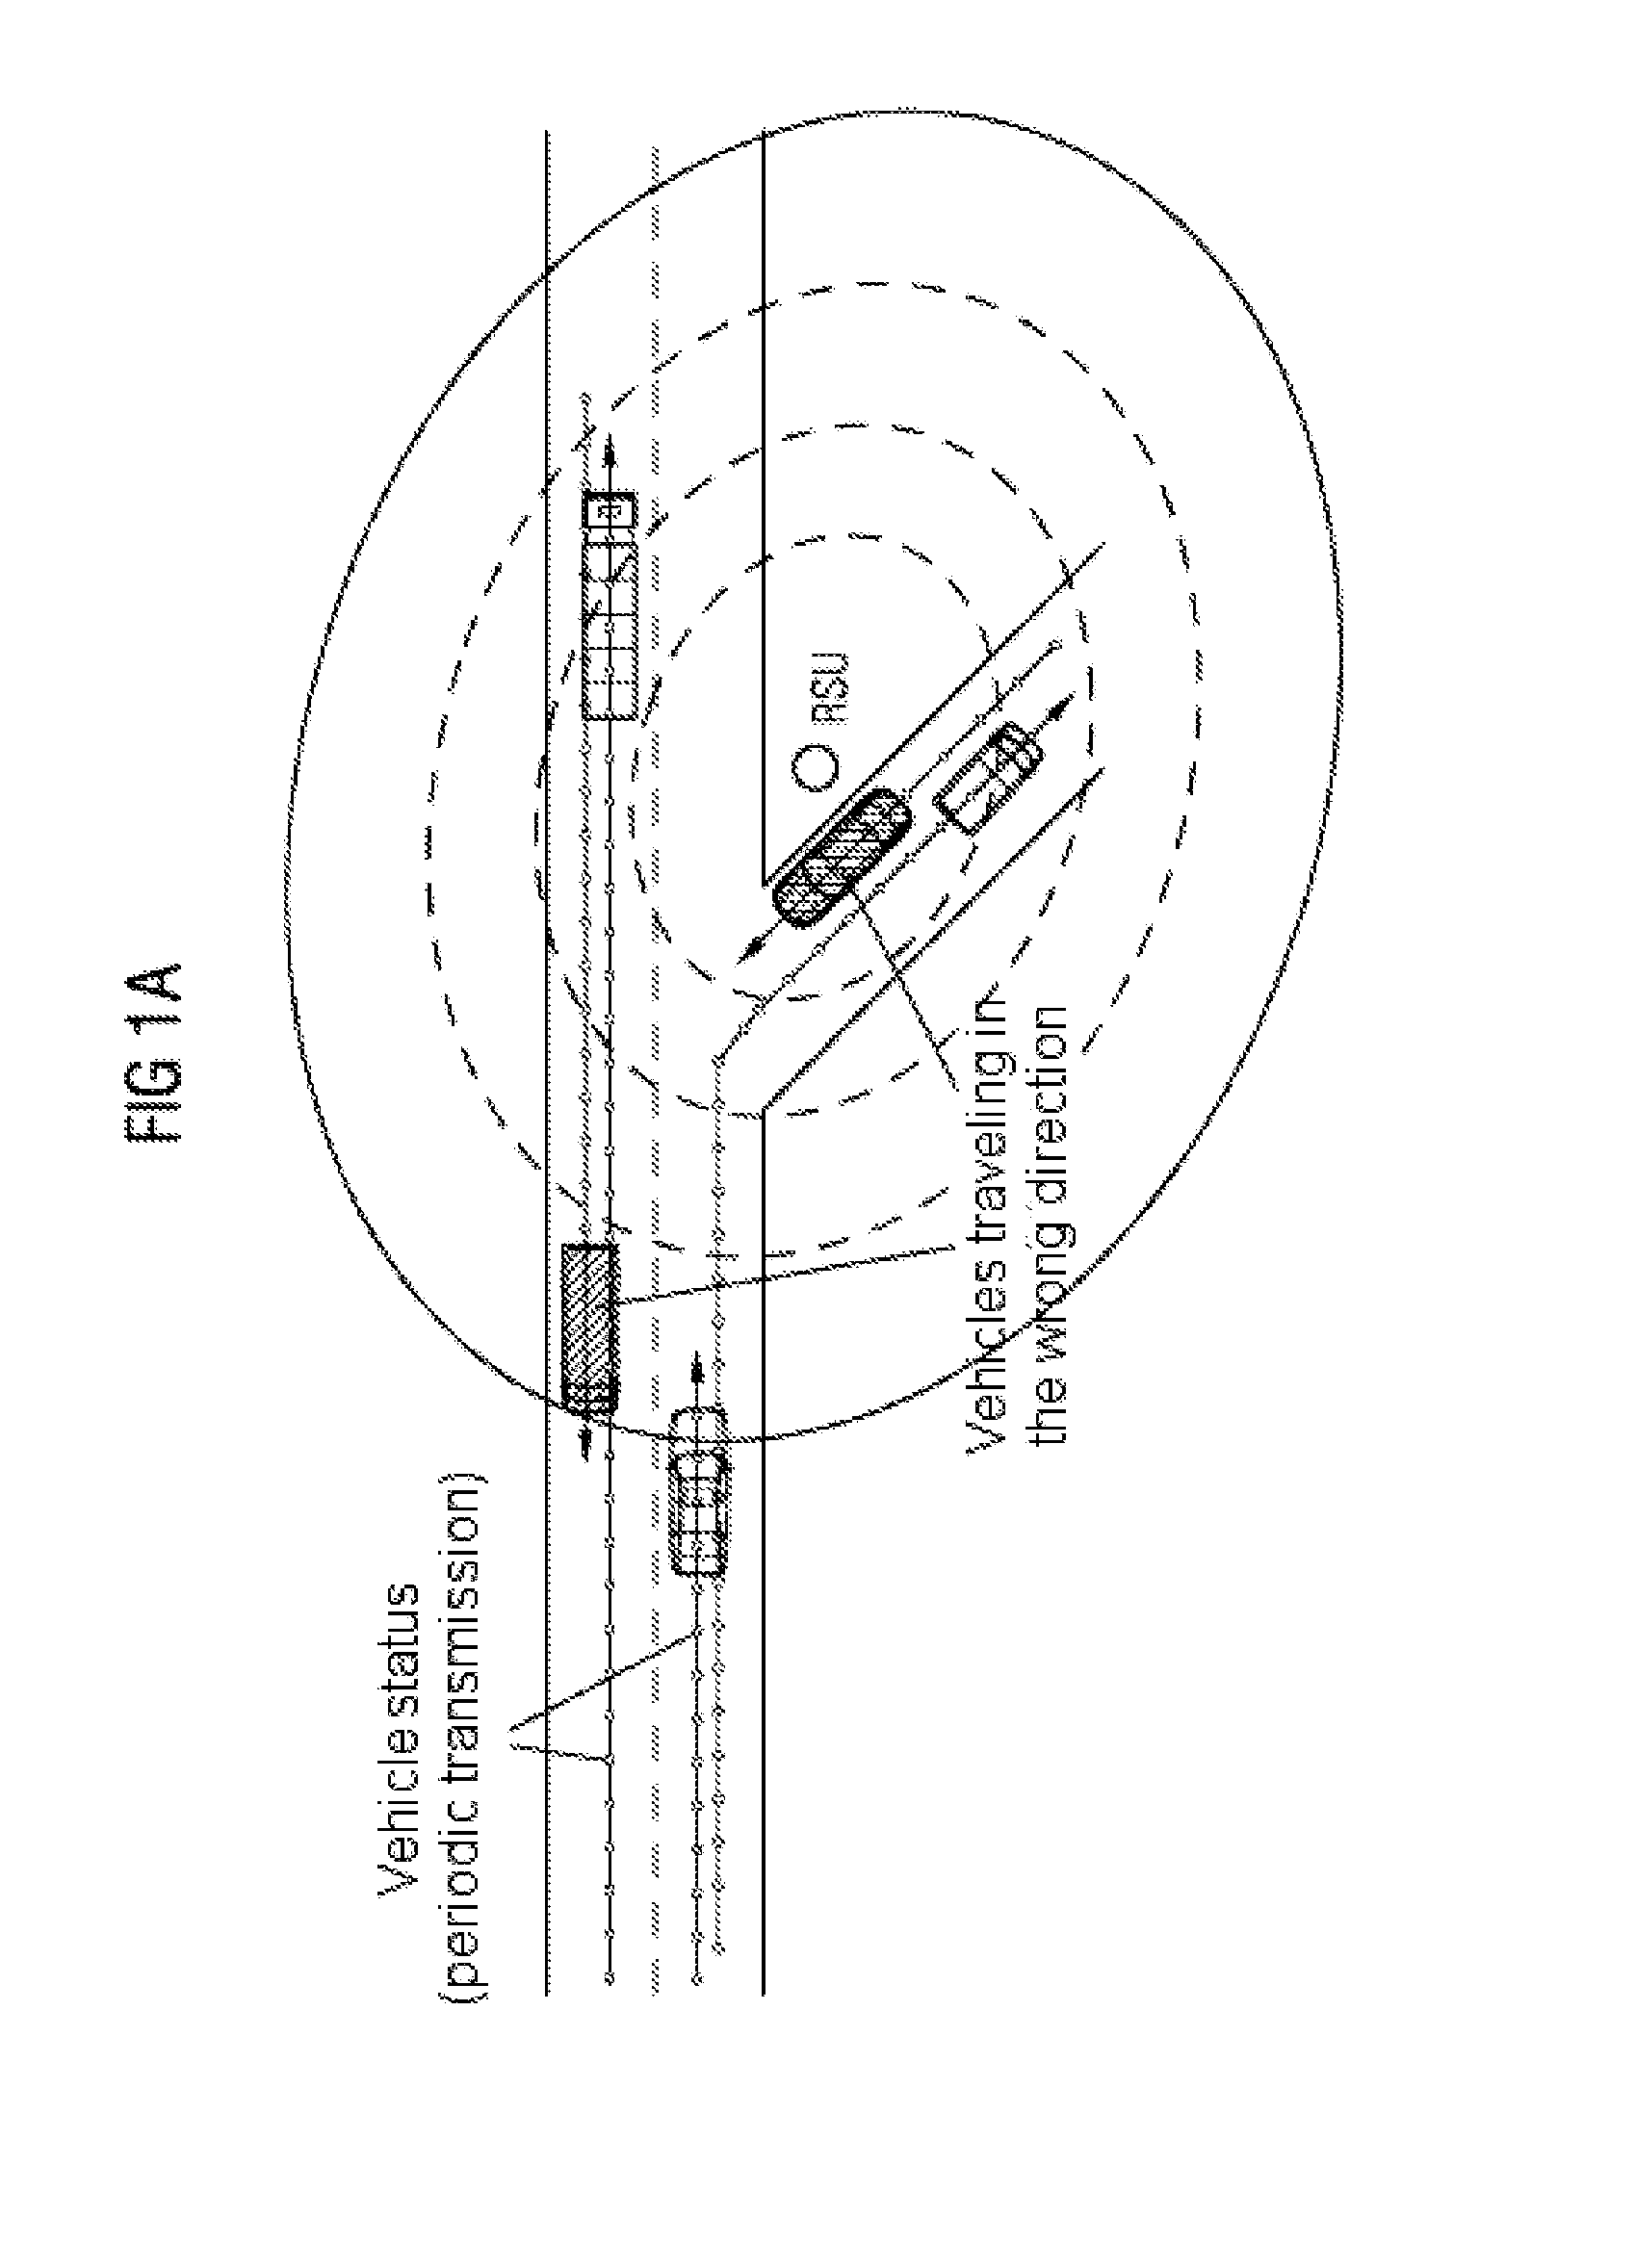 Method for Communicating within an Ad Hoc-Type Motor Vehicle Communication System